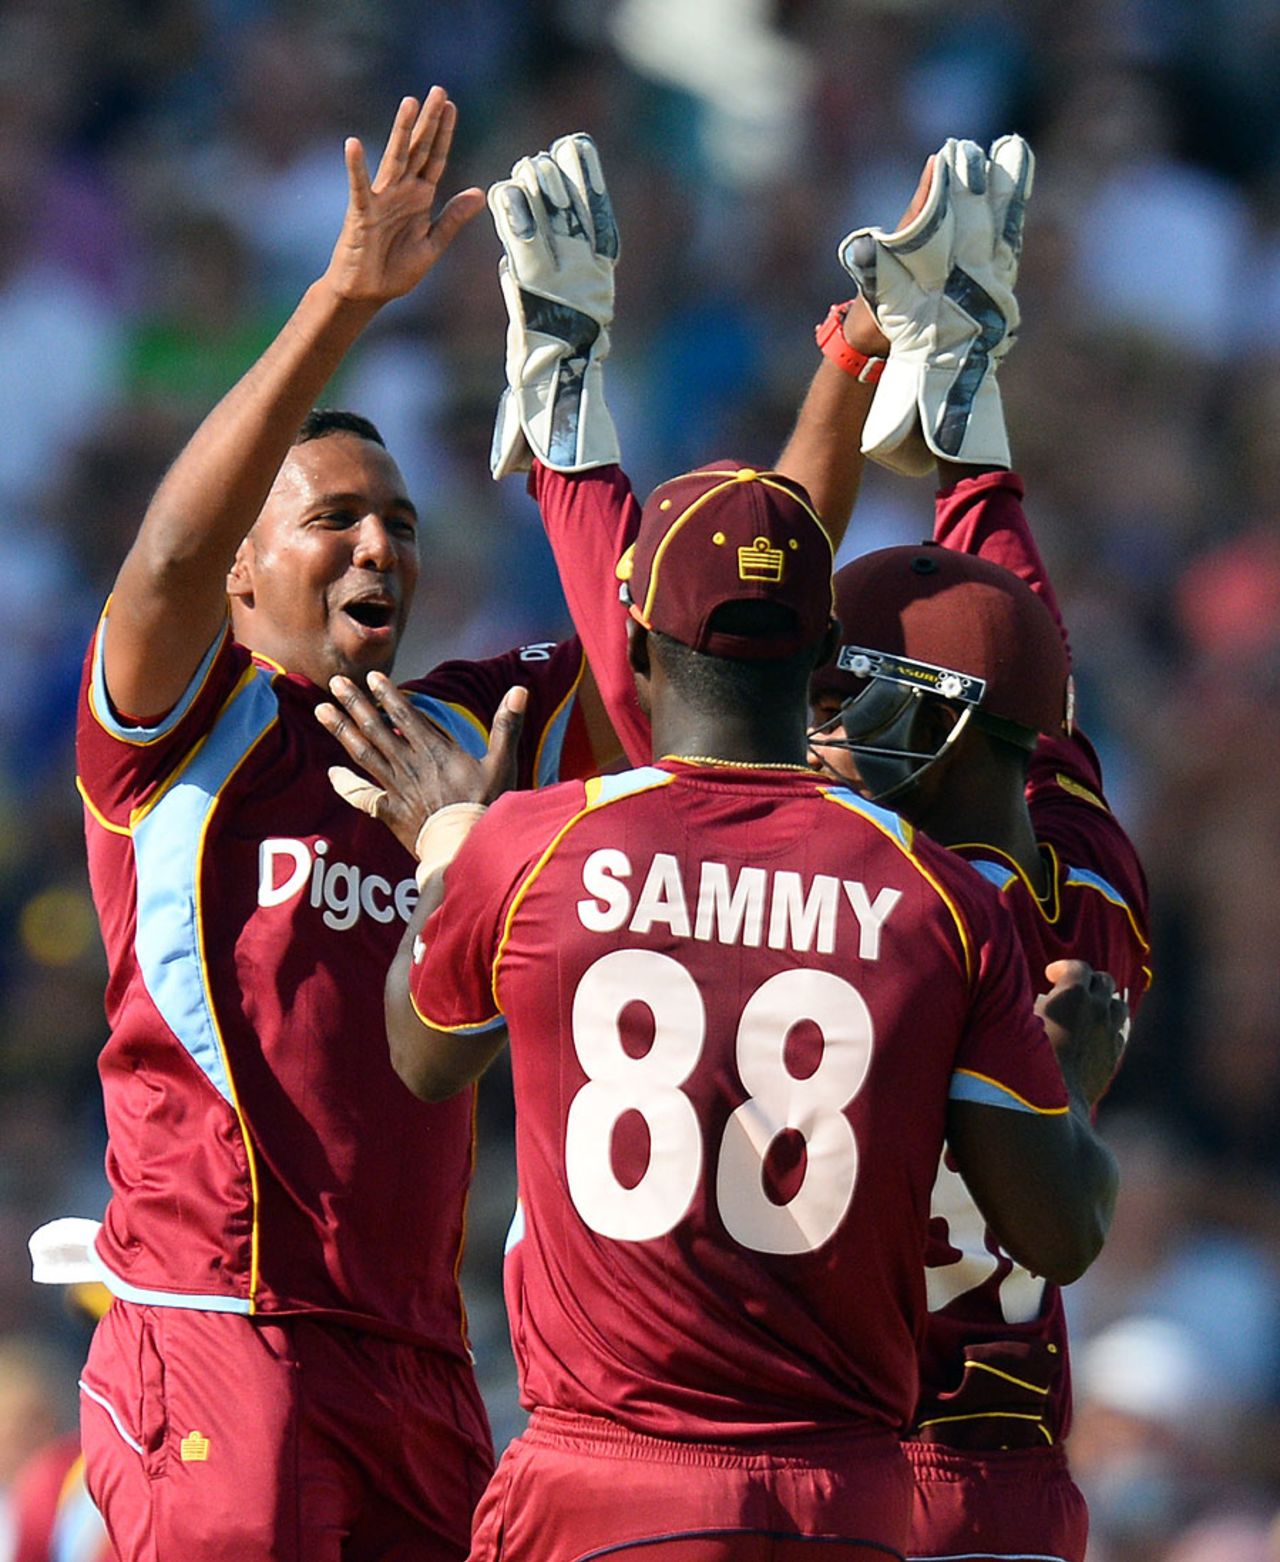 Samuel Badree removed England's top order, West Indies v England, 1st T20, Barbados, March 9, 2014